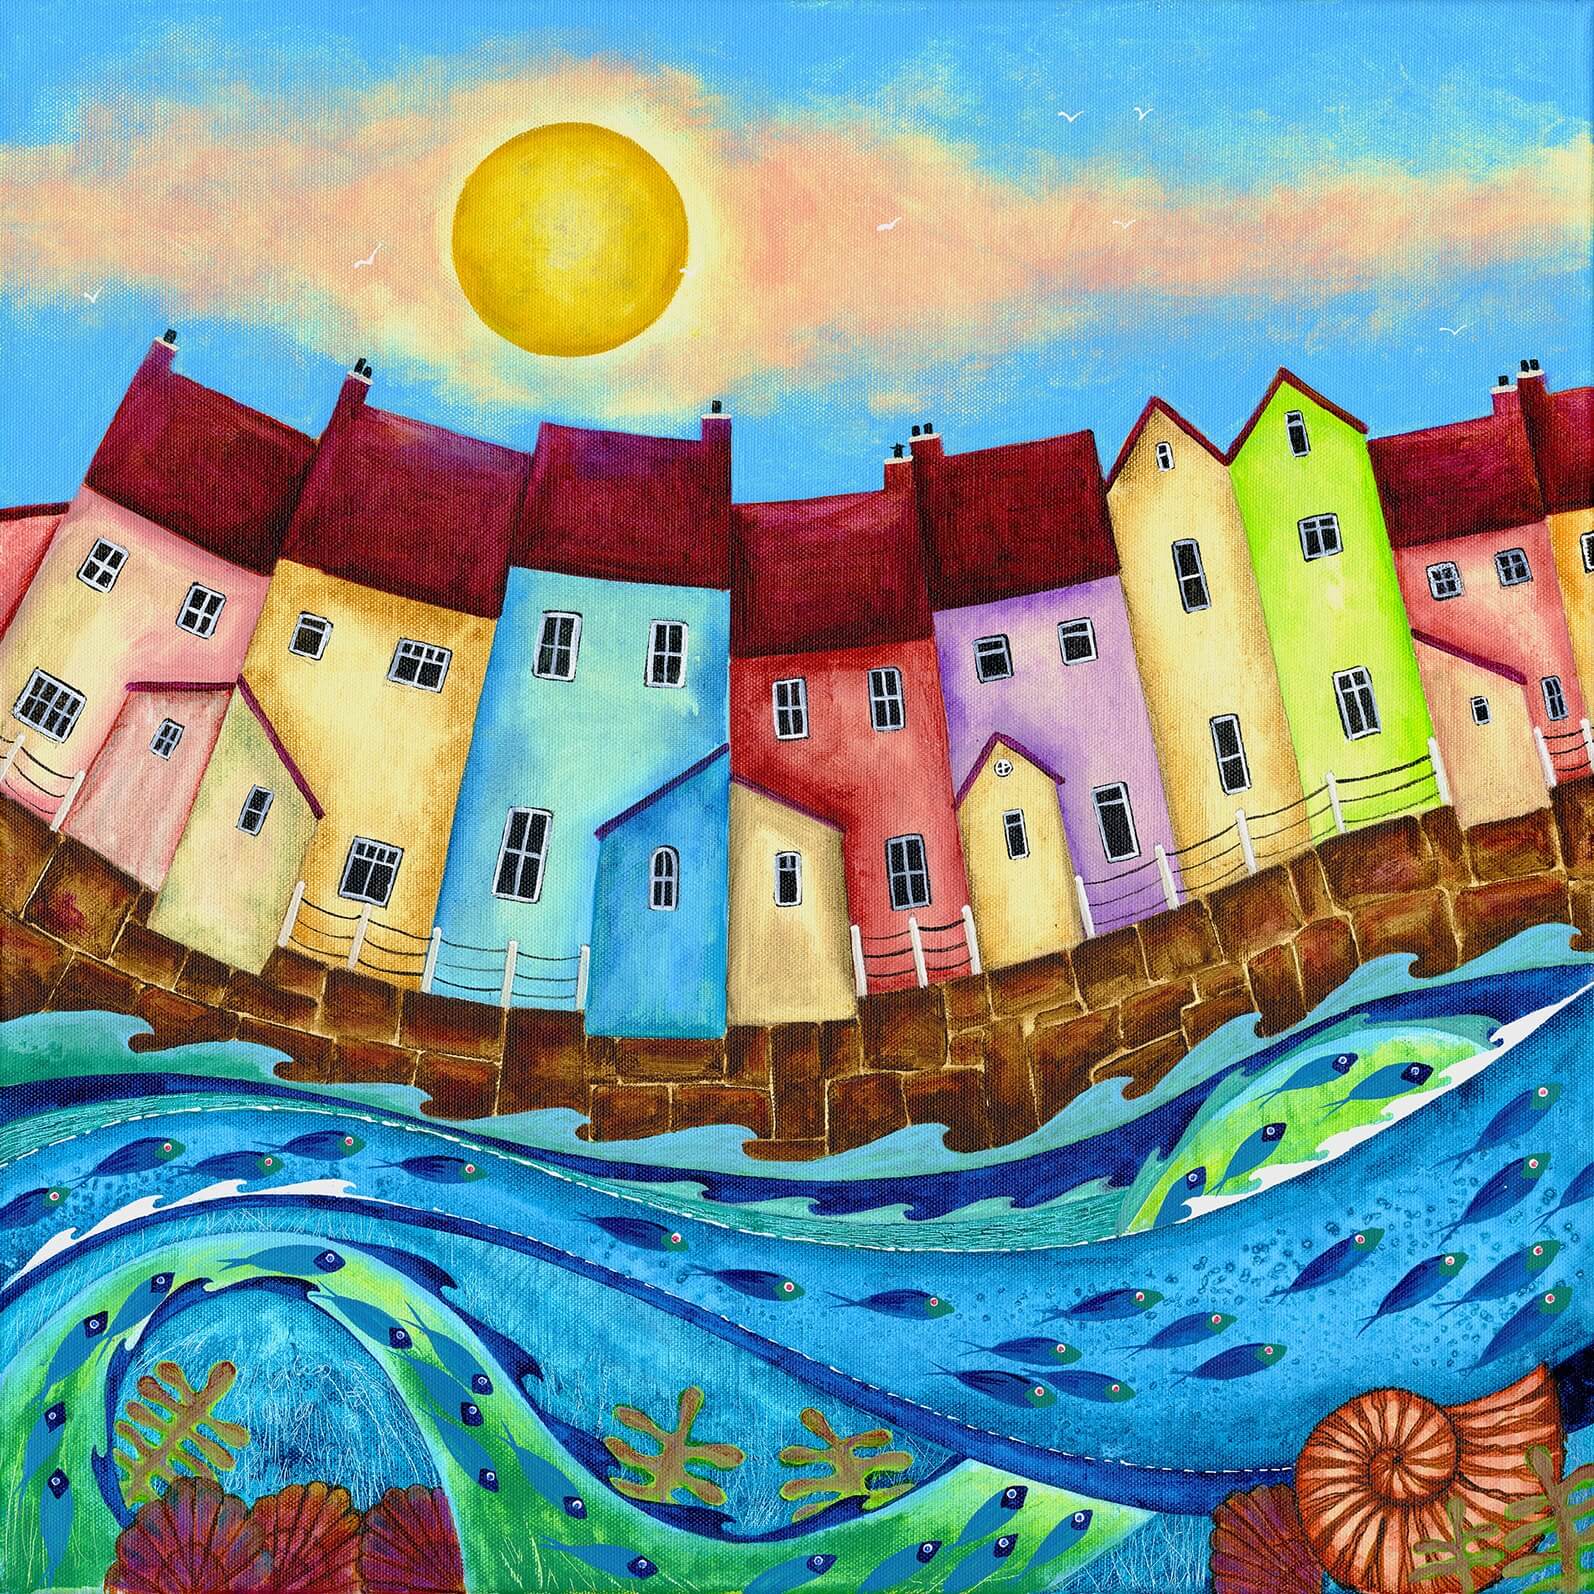 Vibrant painting by sea-inspired artist Bridget Wilkinson, created in a unique style that makes one think of naive art. The painting shows a compact harbor houses, each painted in a different color. Above is the clear sky and a warm sun. In the foreground is the water, full of fish. The water seems alive, moving in waves.